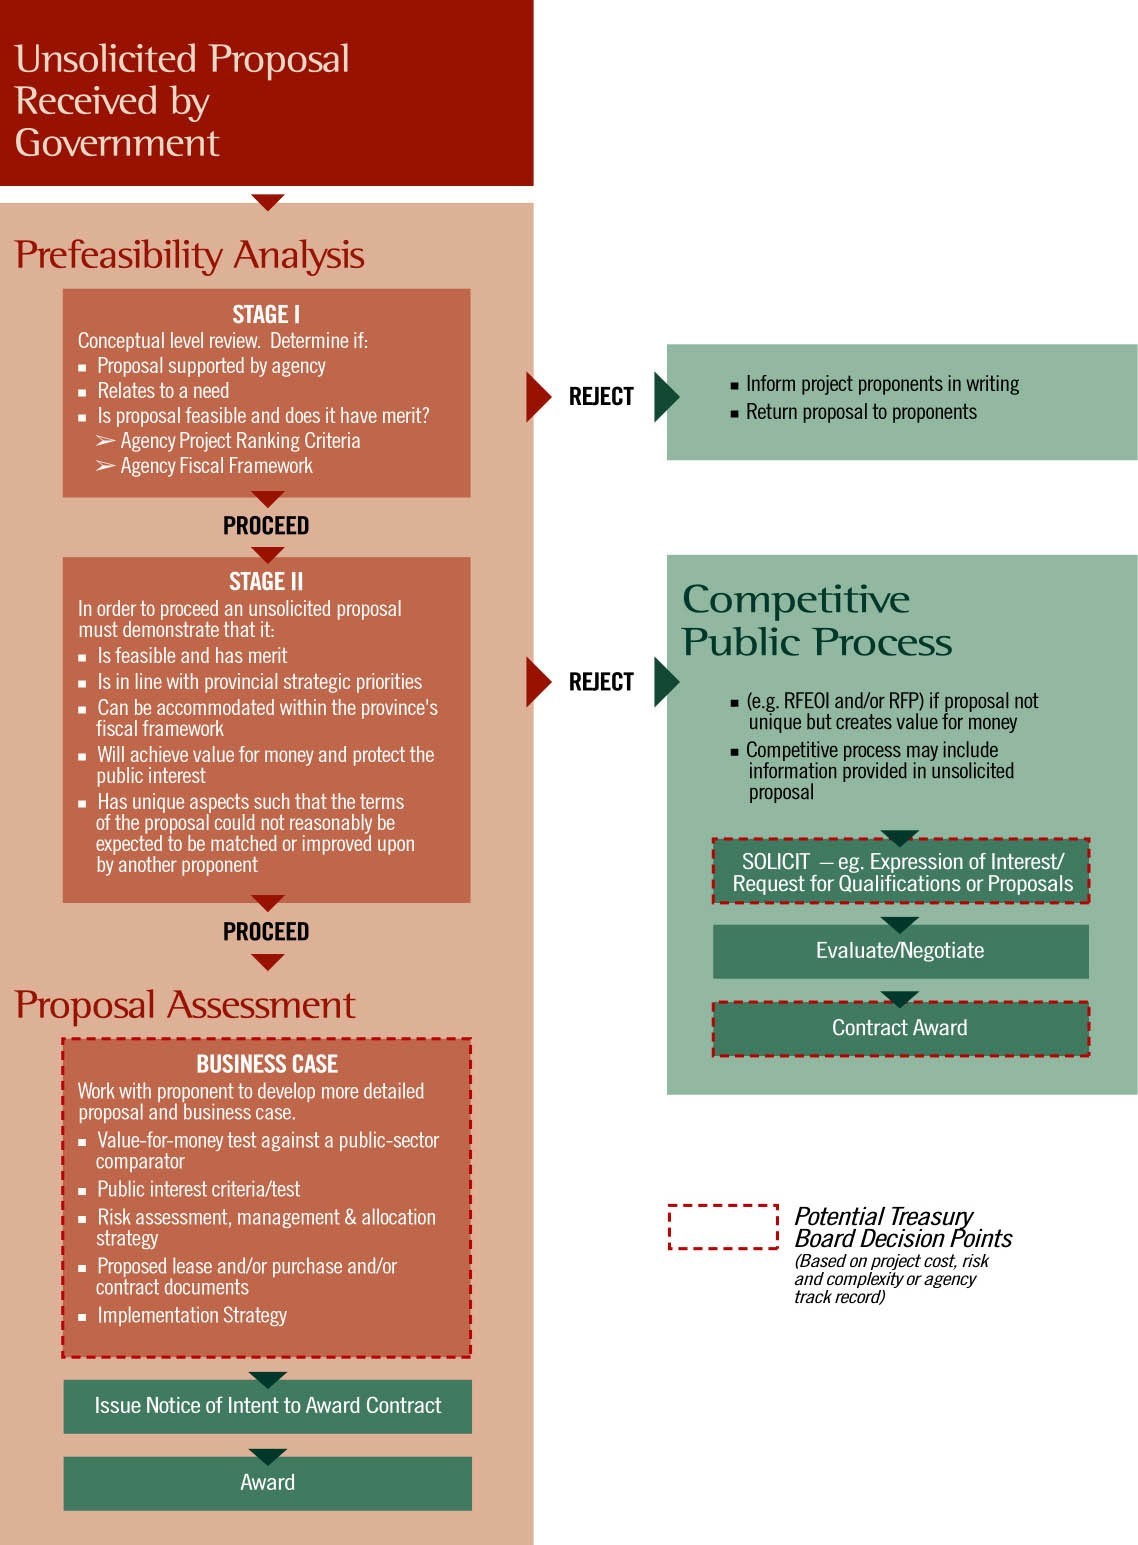 Unsolicited Proposals Received by Government Decision Tree - Steps Include Prefeasibility Analysis (two stages), and a Proposal Assessment with a business case, notice of intent to award contract and an award. There is a Competitive Public Process if the Prefeasibility Assessment is rejected.